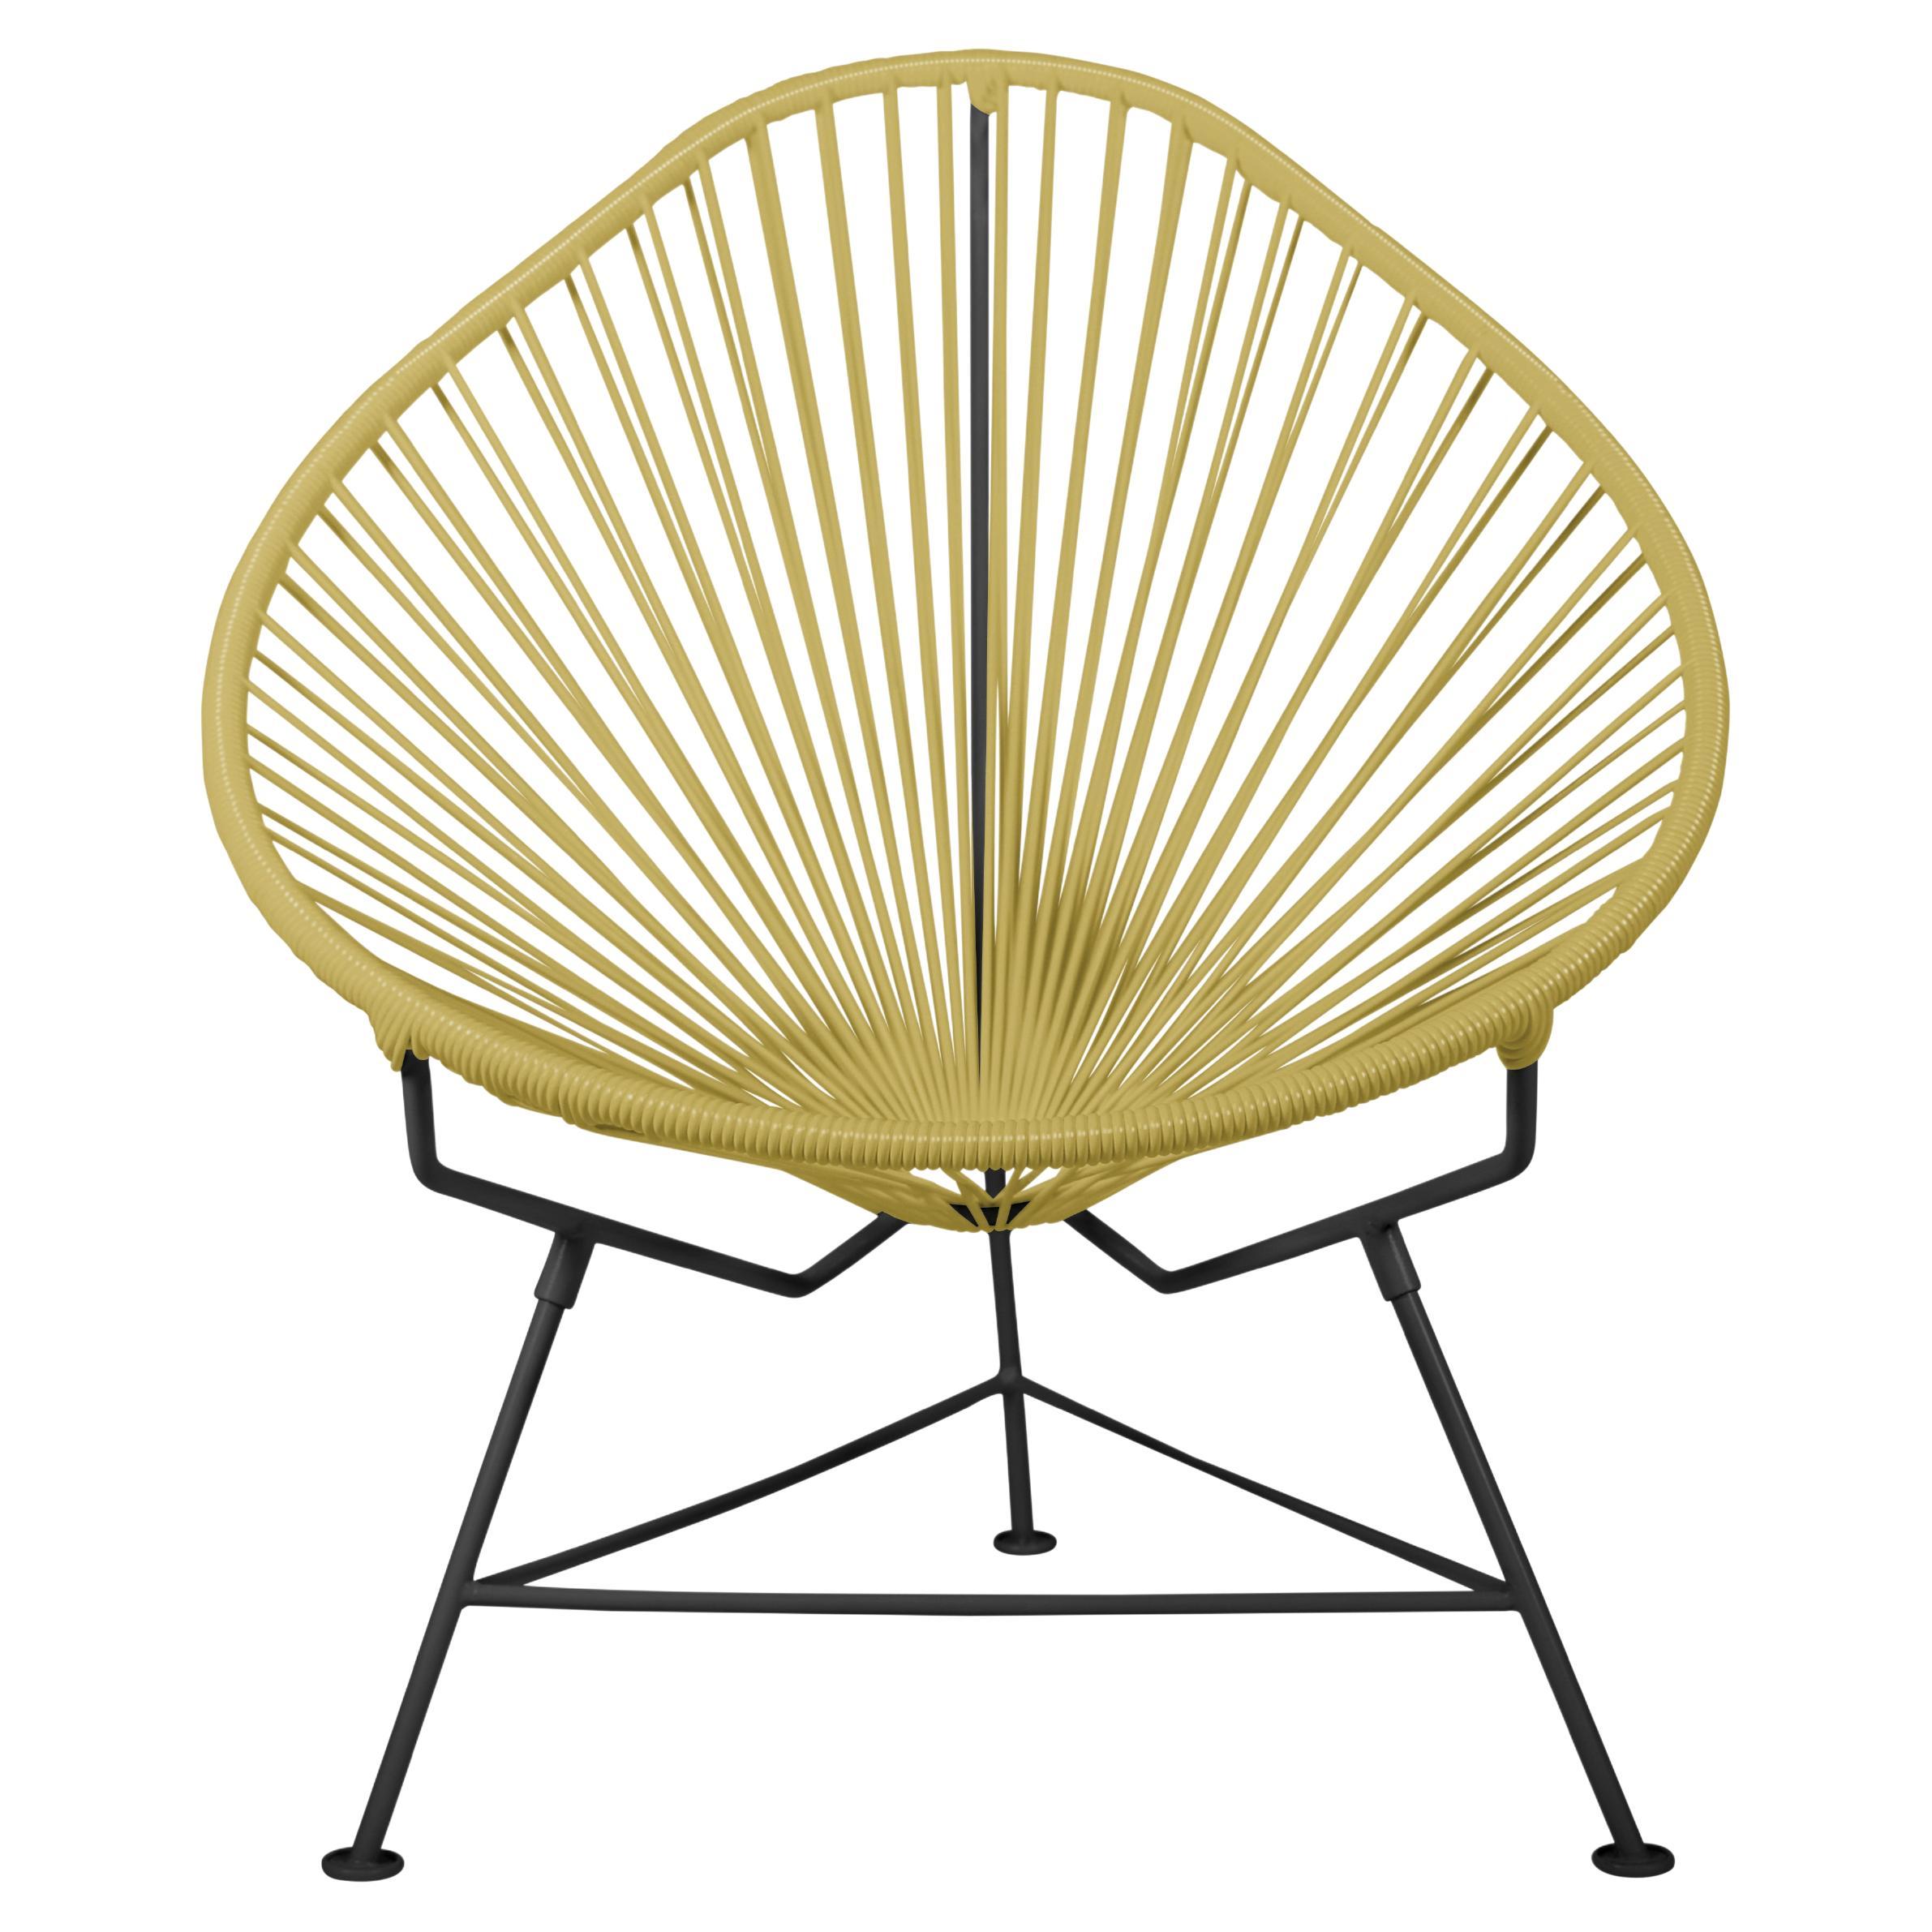 Innit Designs Acapulco Chair Gold Weave on Black Frame For Sale